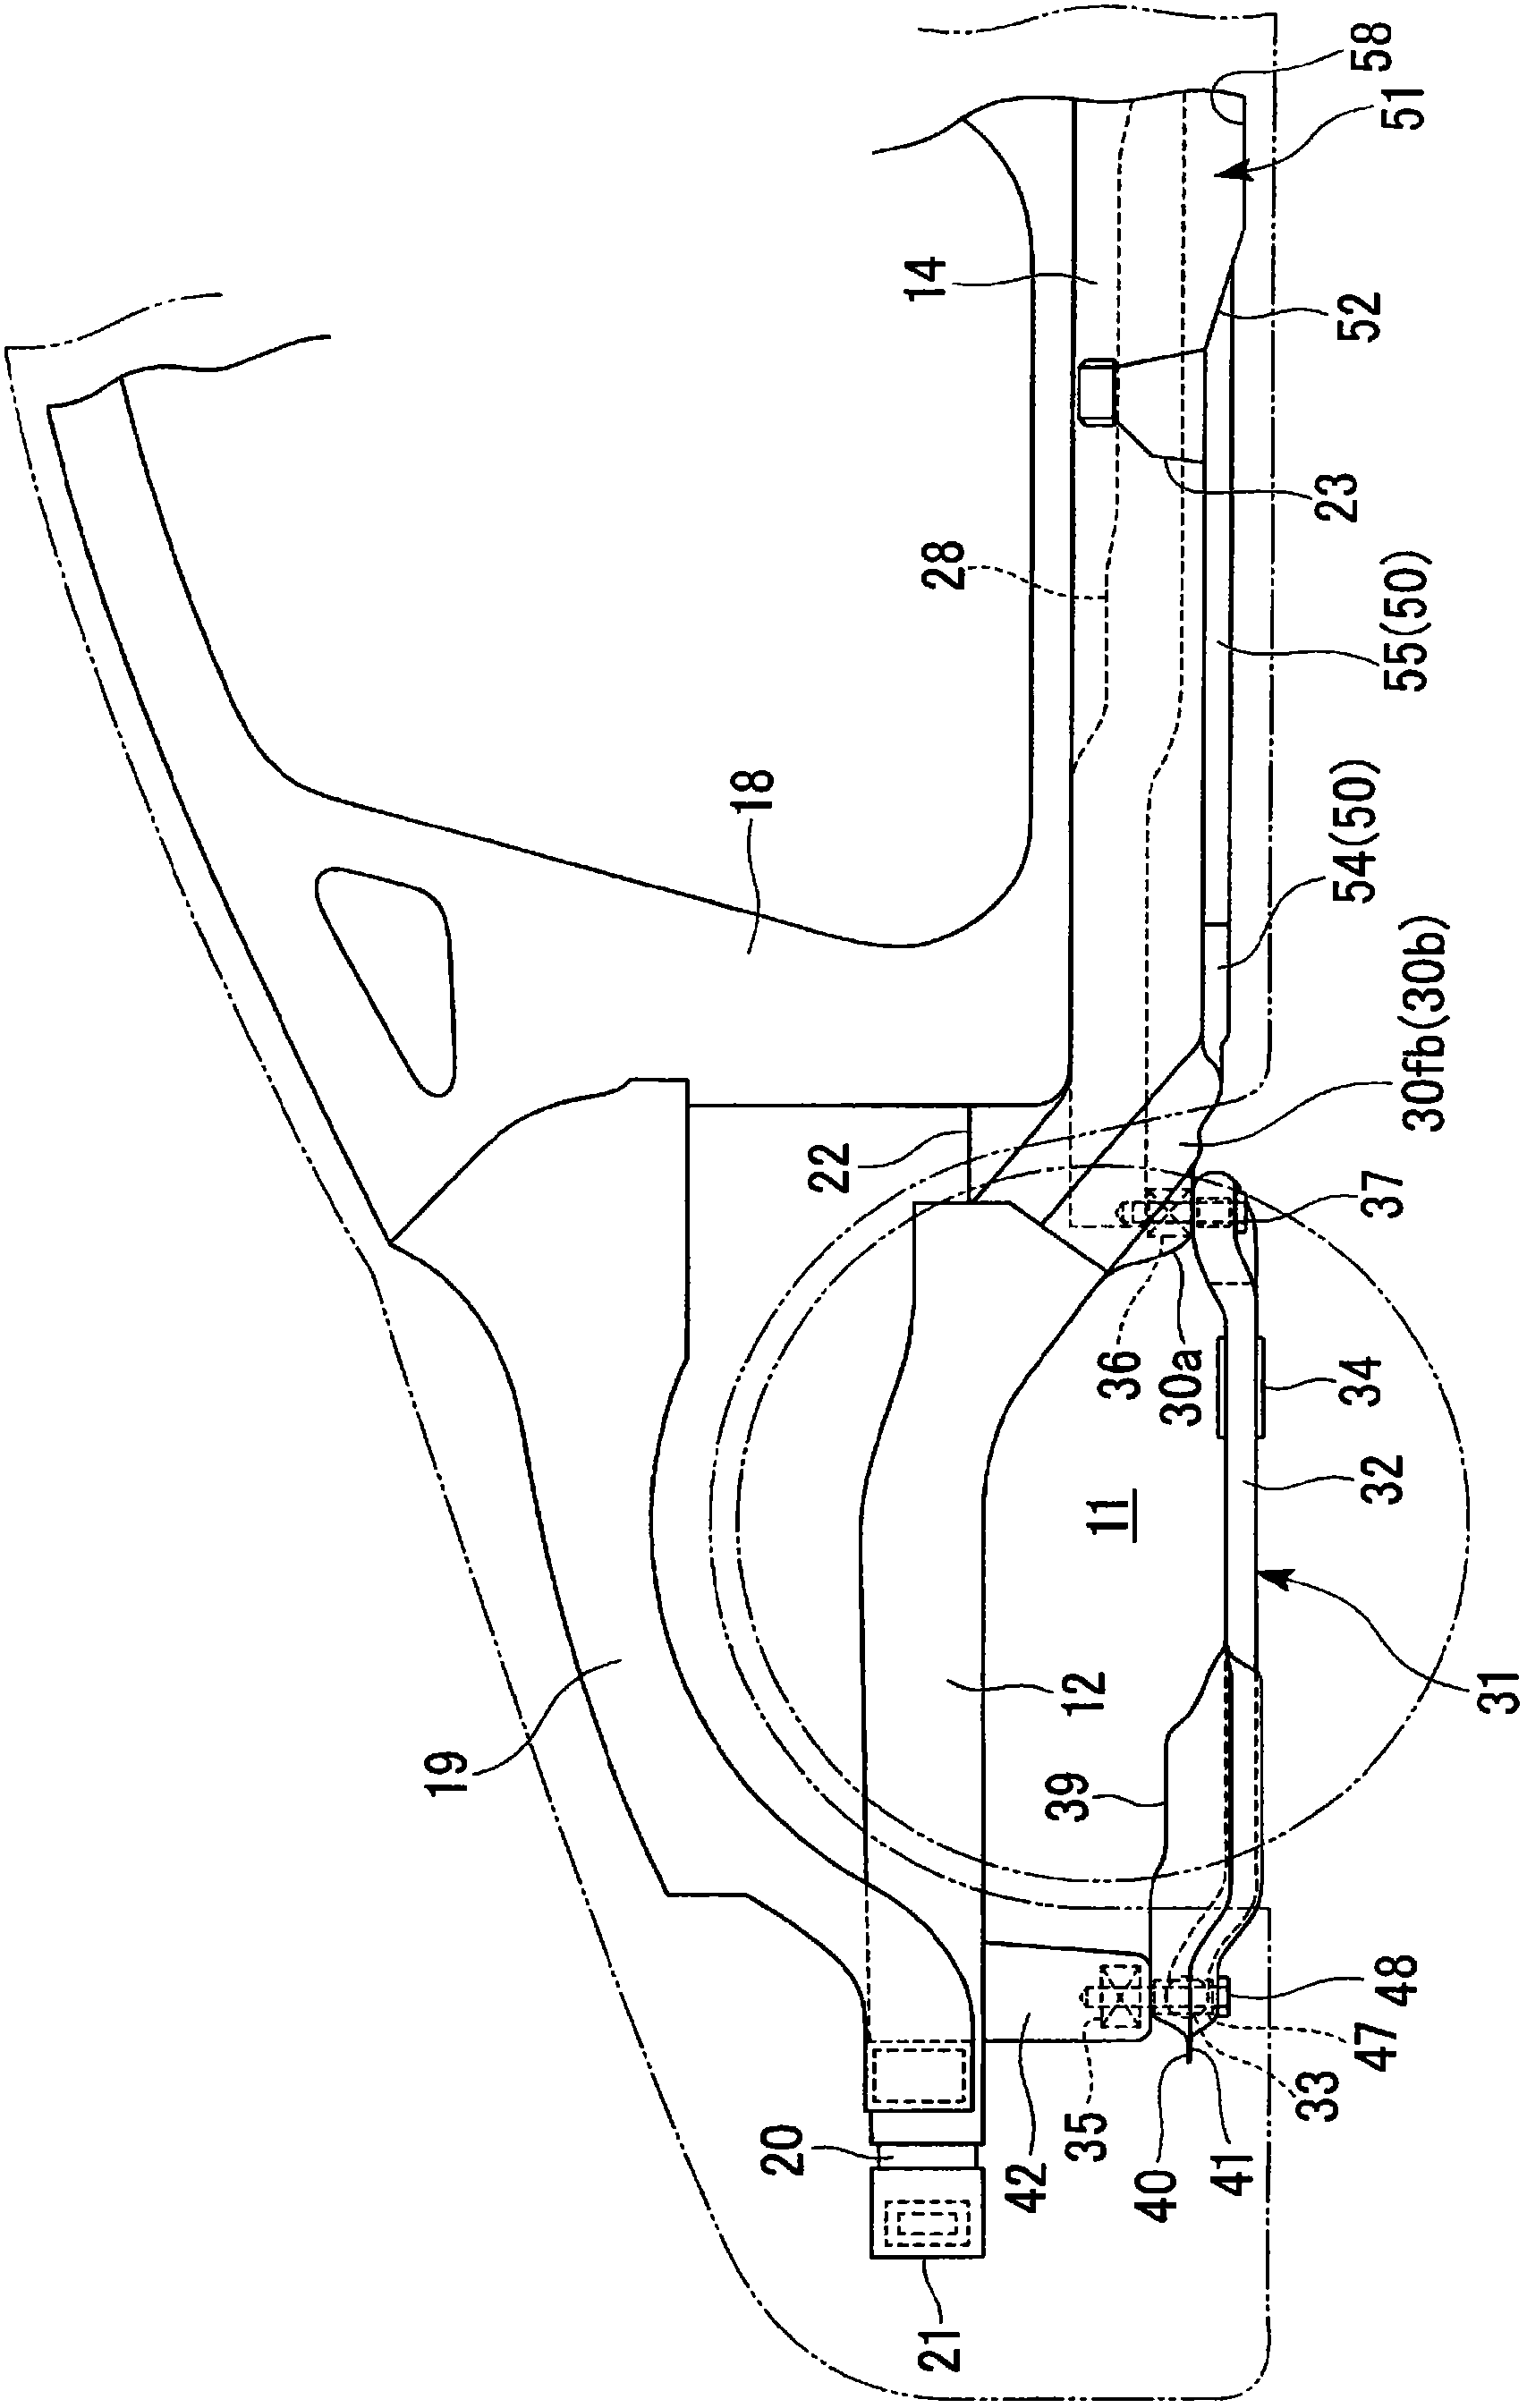 Vehicle body panel joining structure